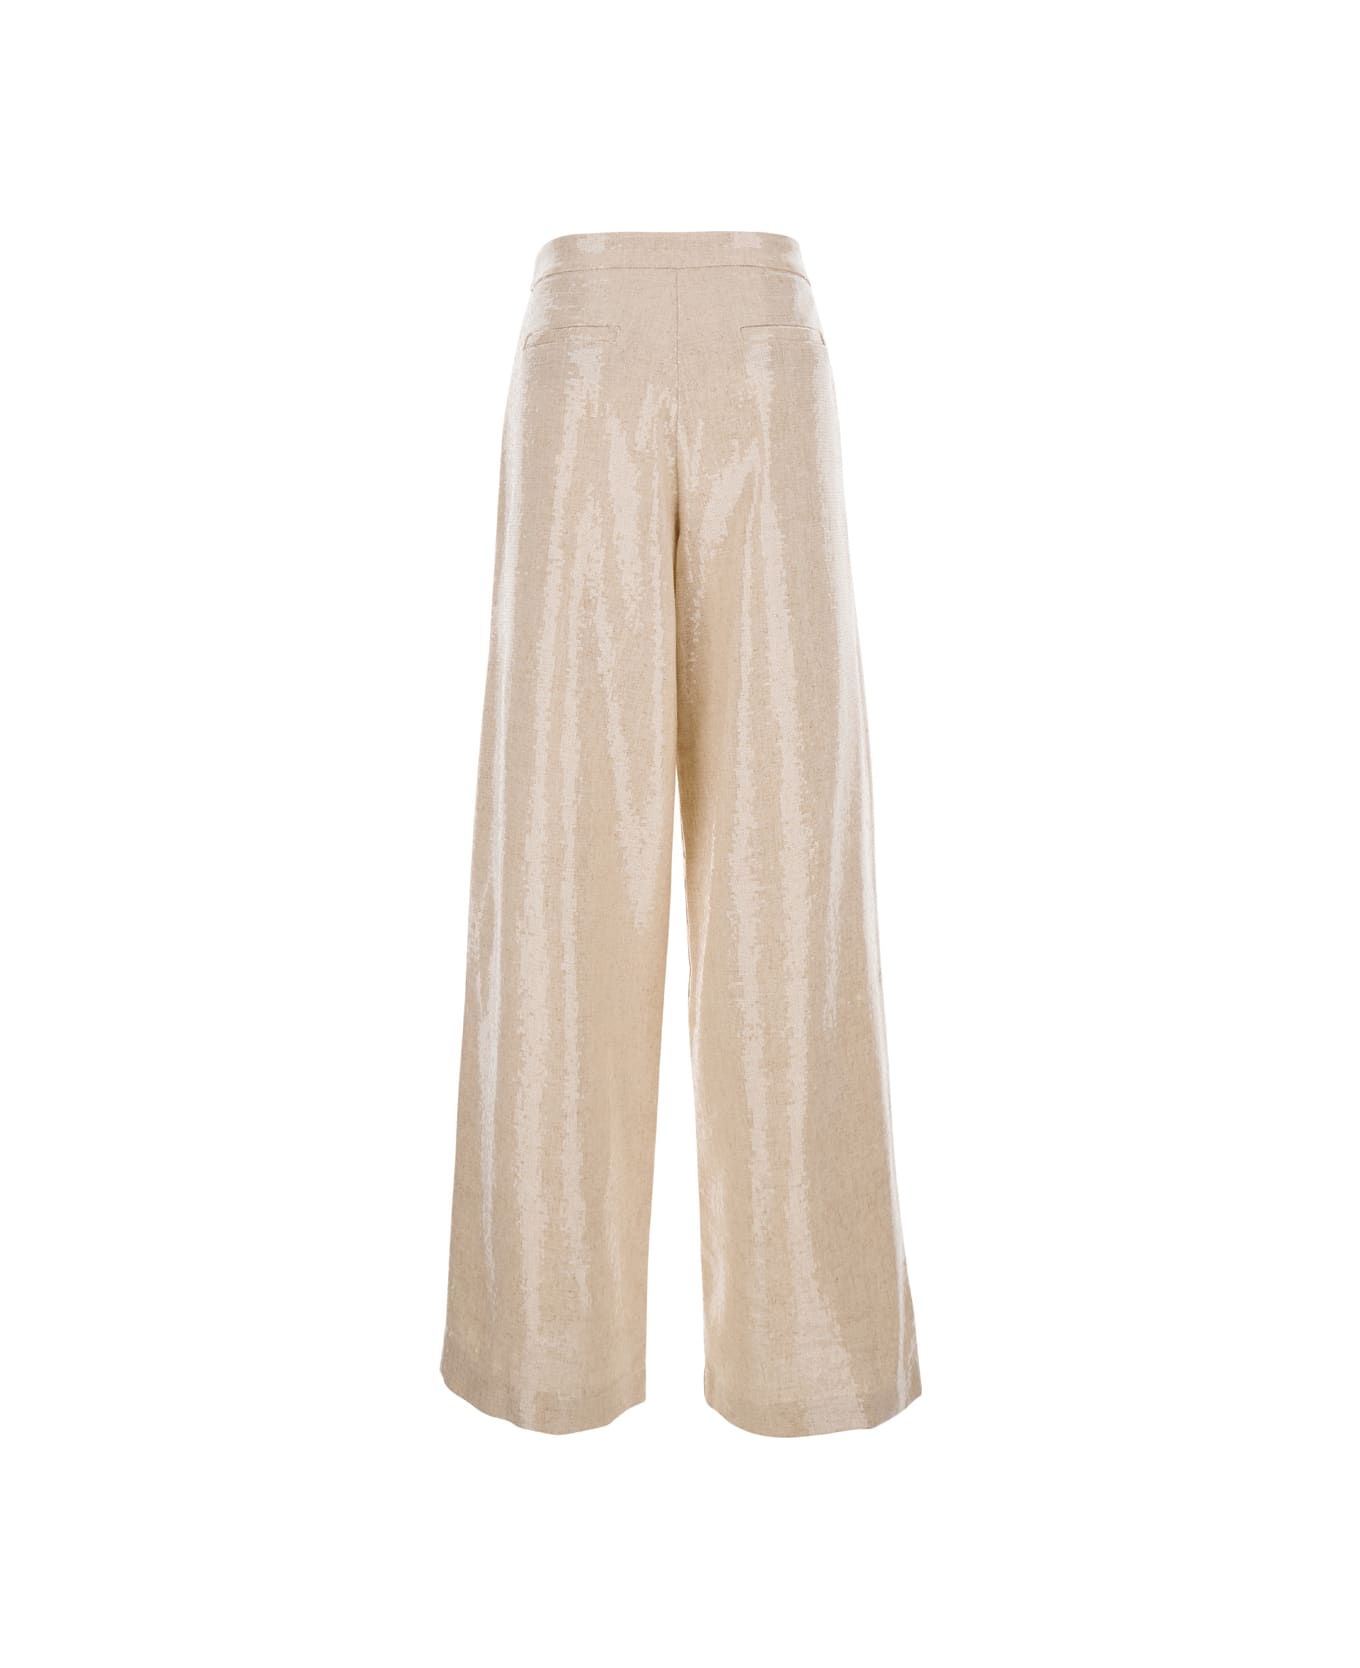 Federica Tosi Paillettes Pants - BAMBOO